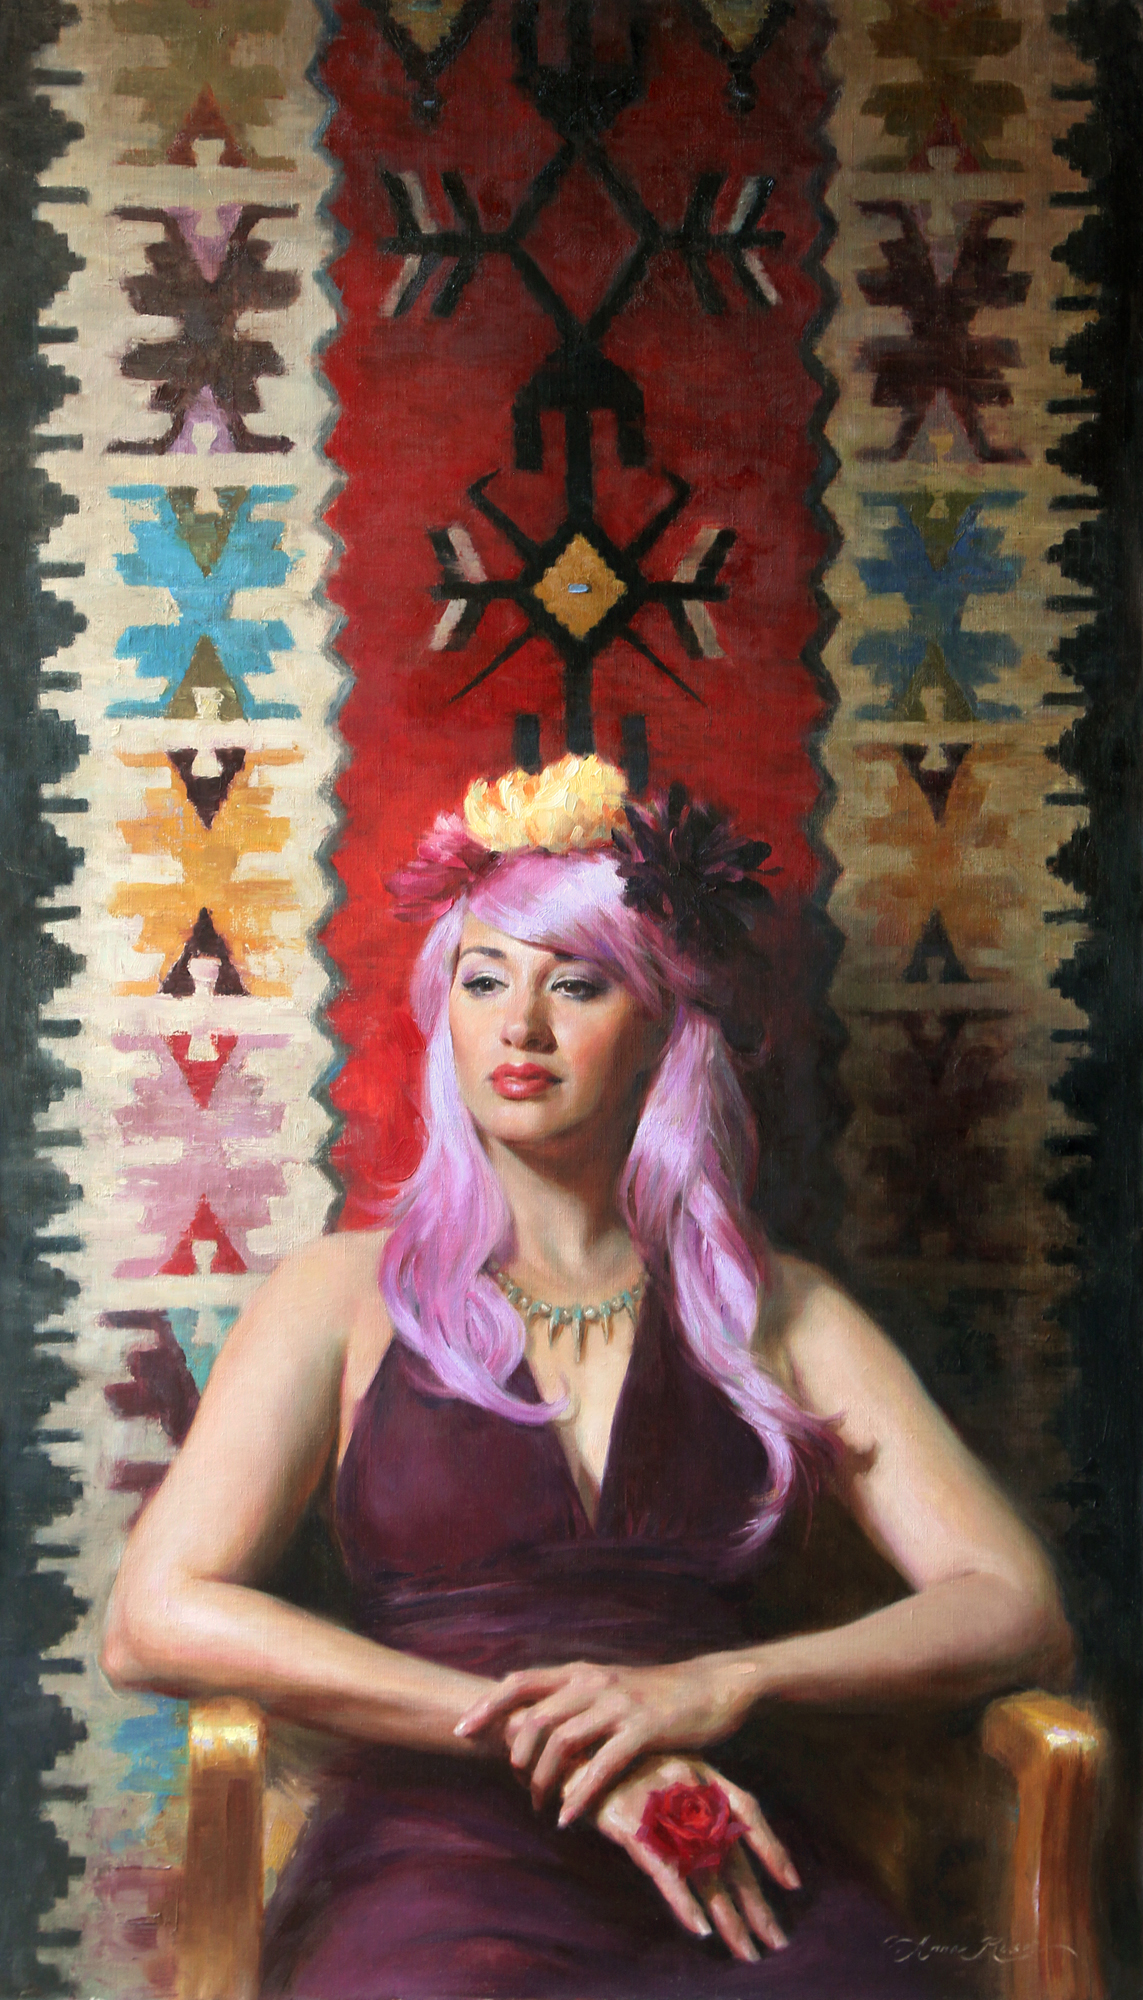 Anna Rose Bain, Native Daughter Modern Woman, oil on linen panel, 42 x 24 inches